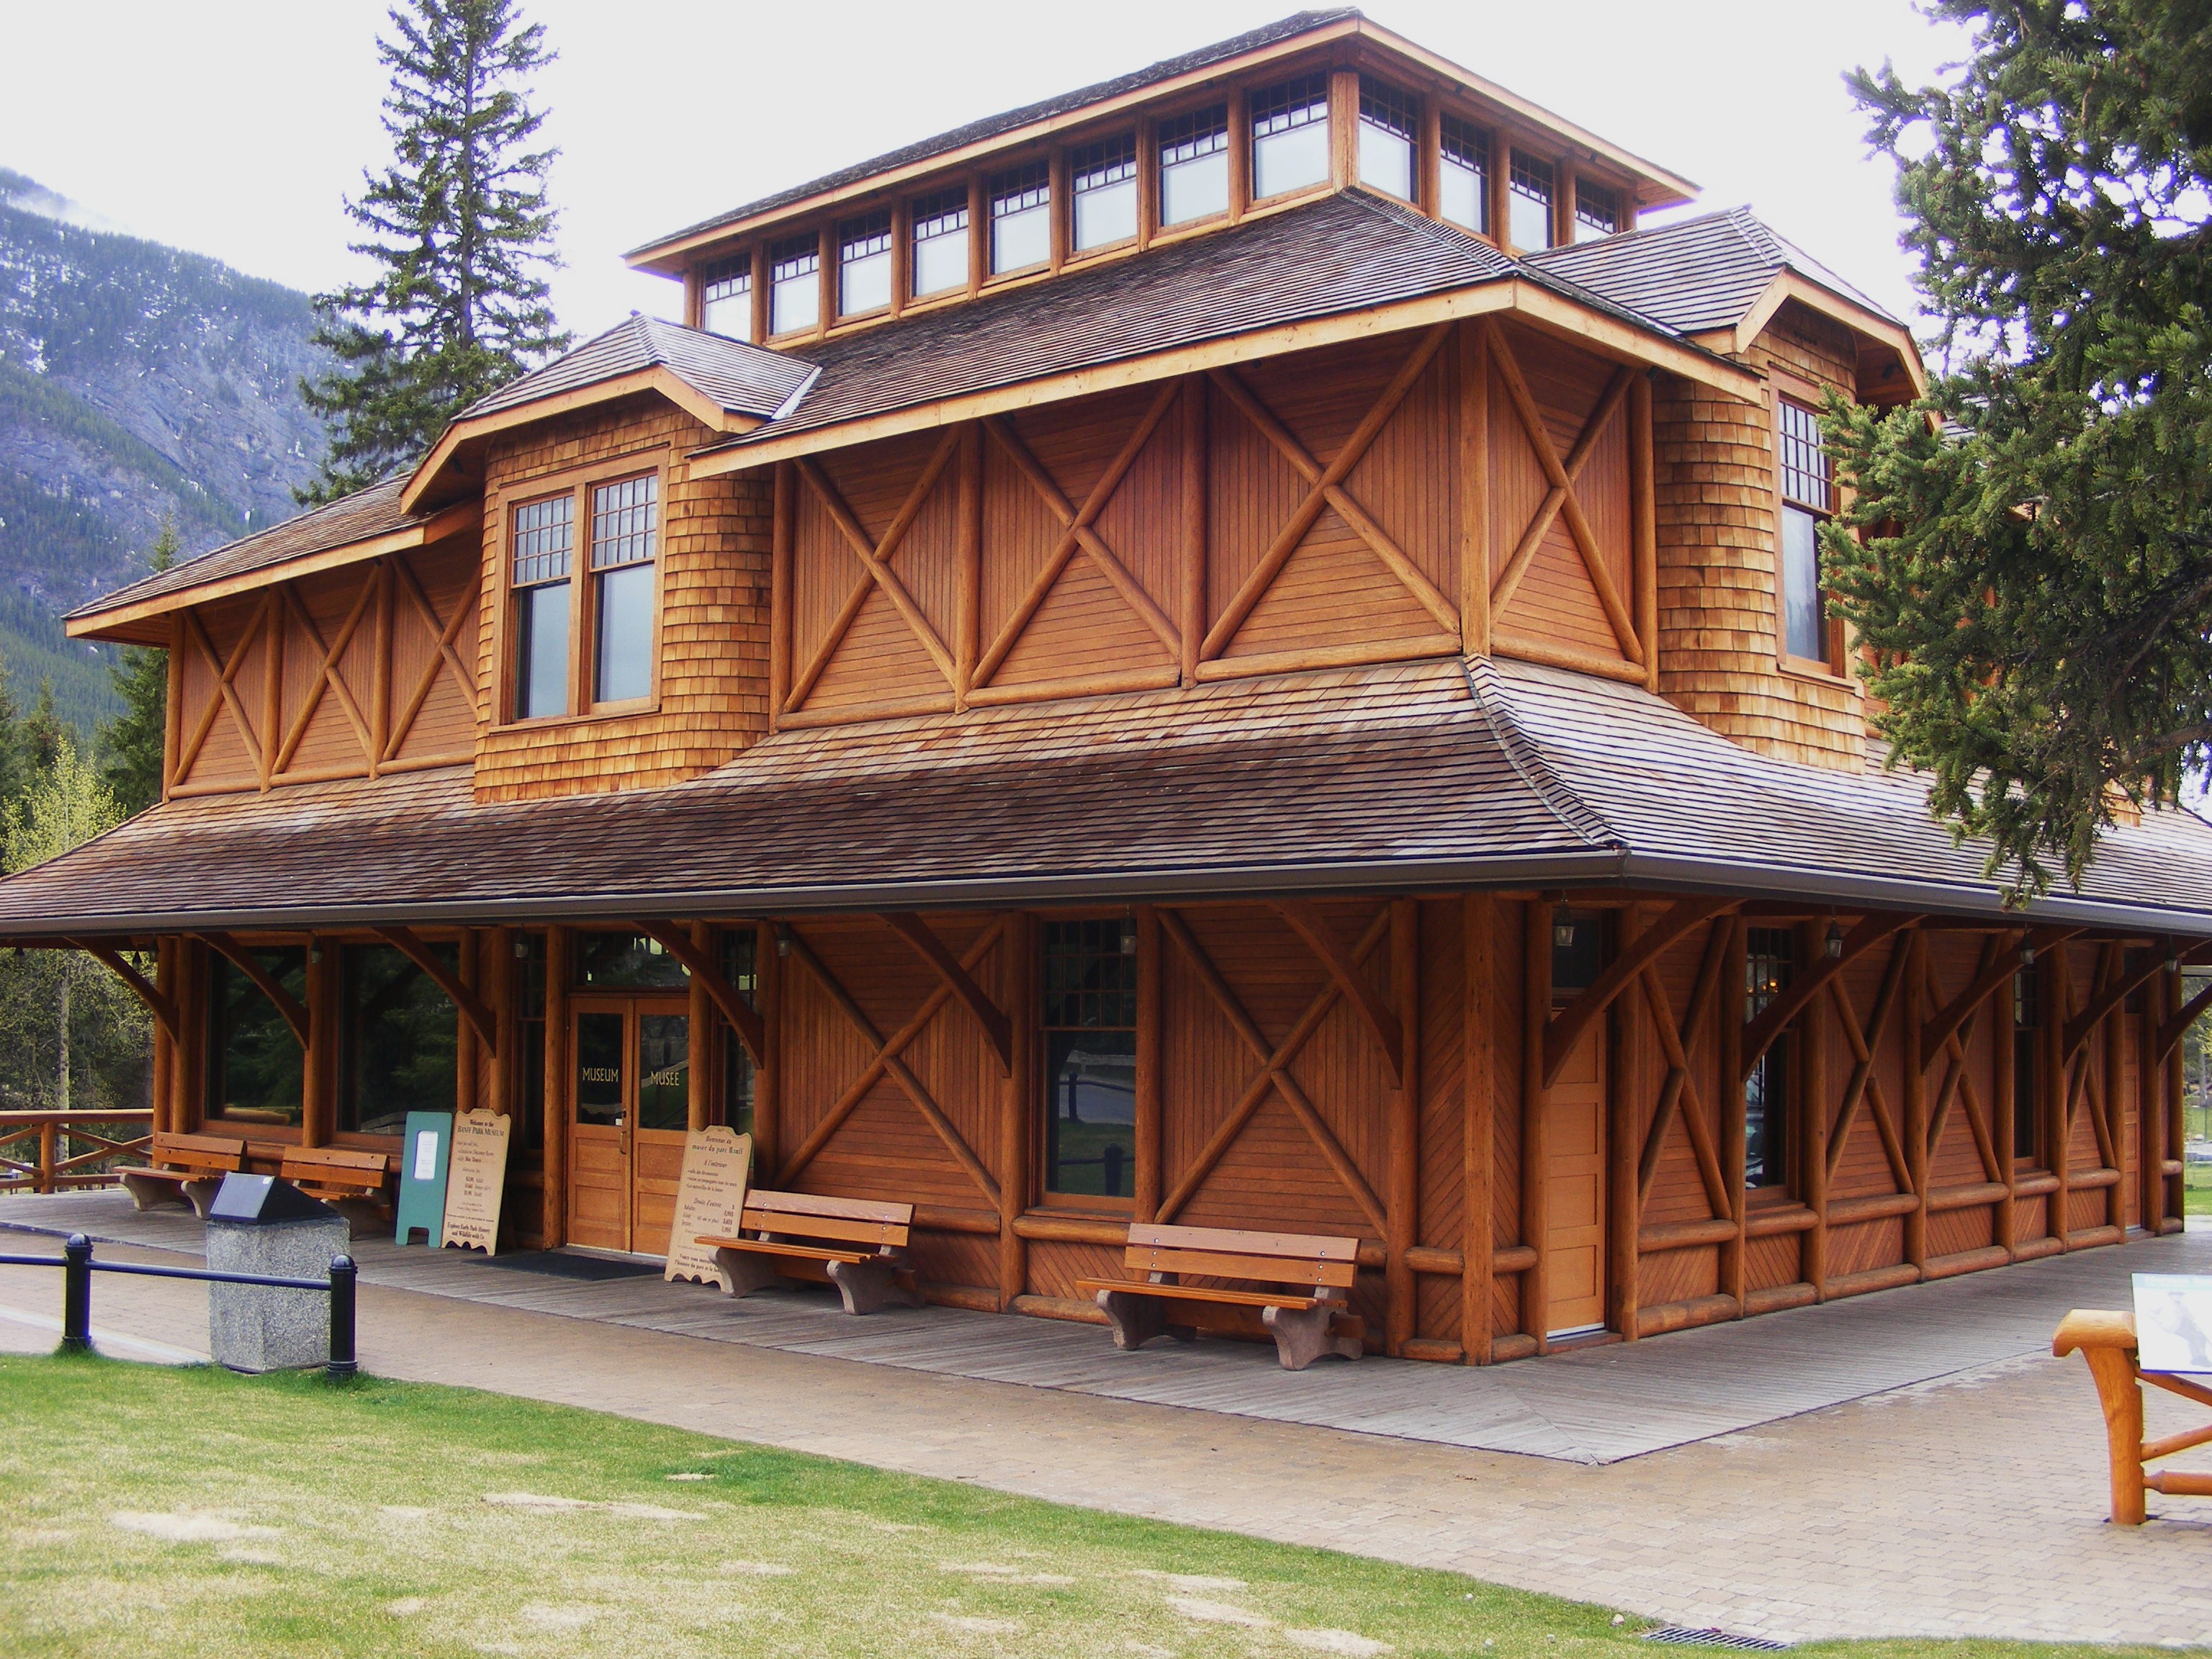 Banff Park Museum National Historic Site in Canada, North America | Museums - Rated 3.6